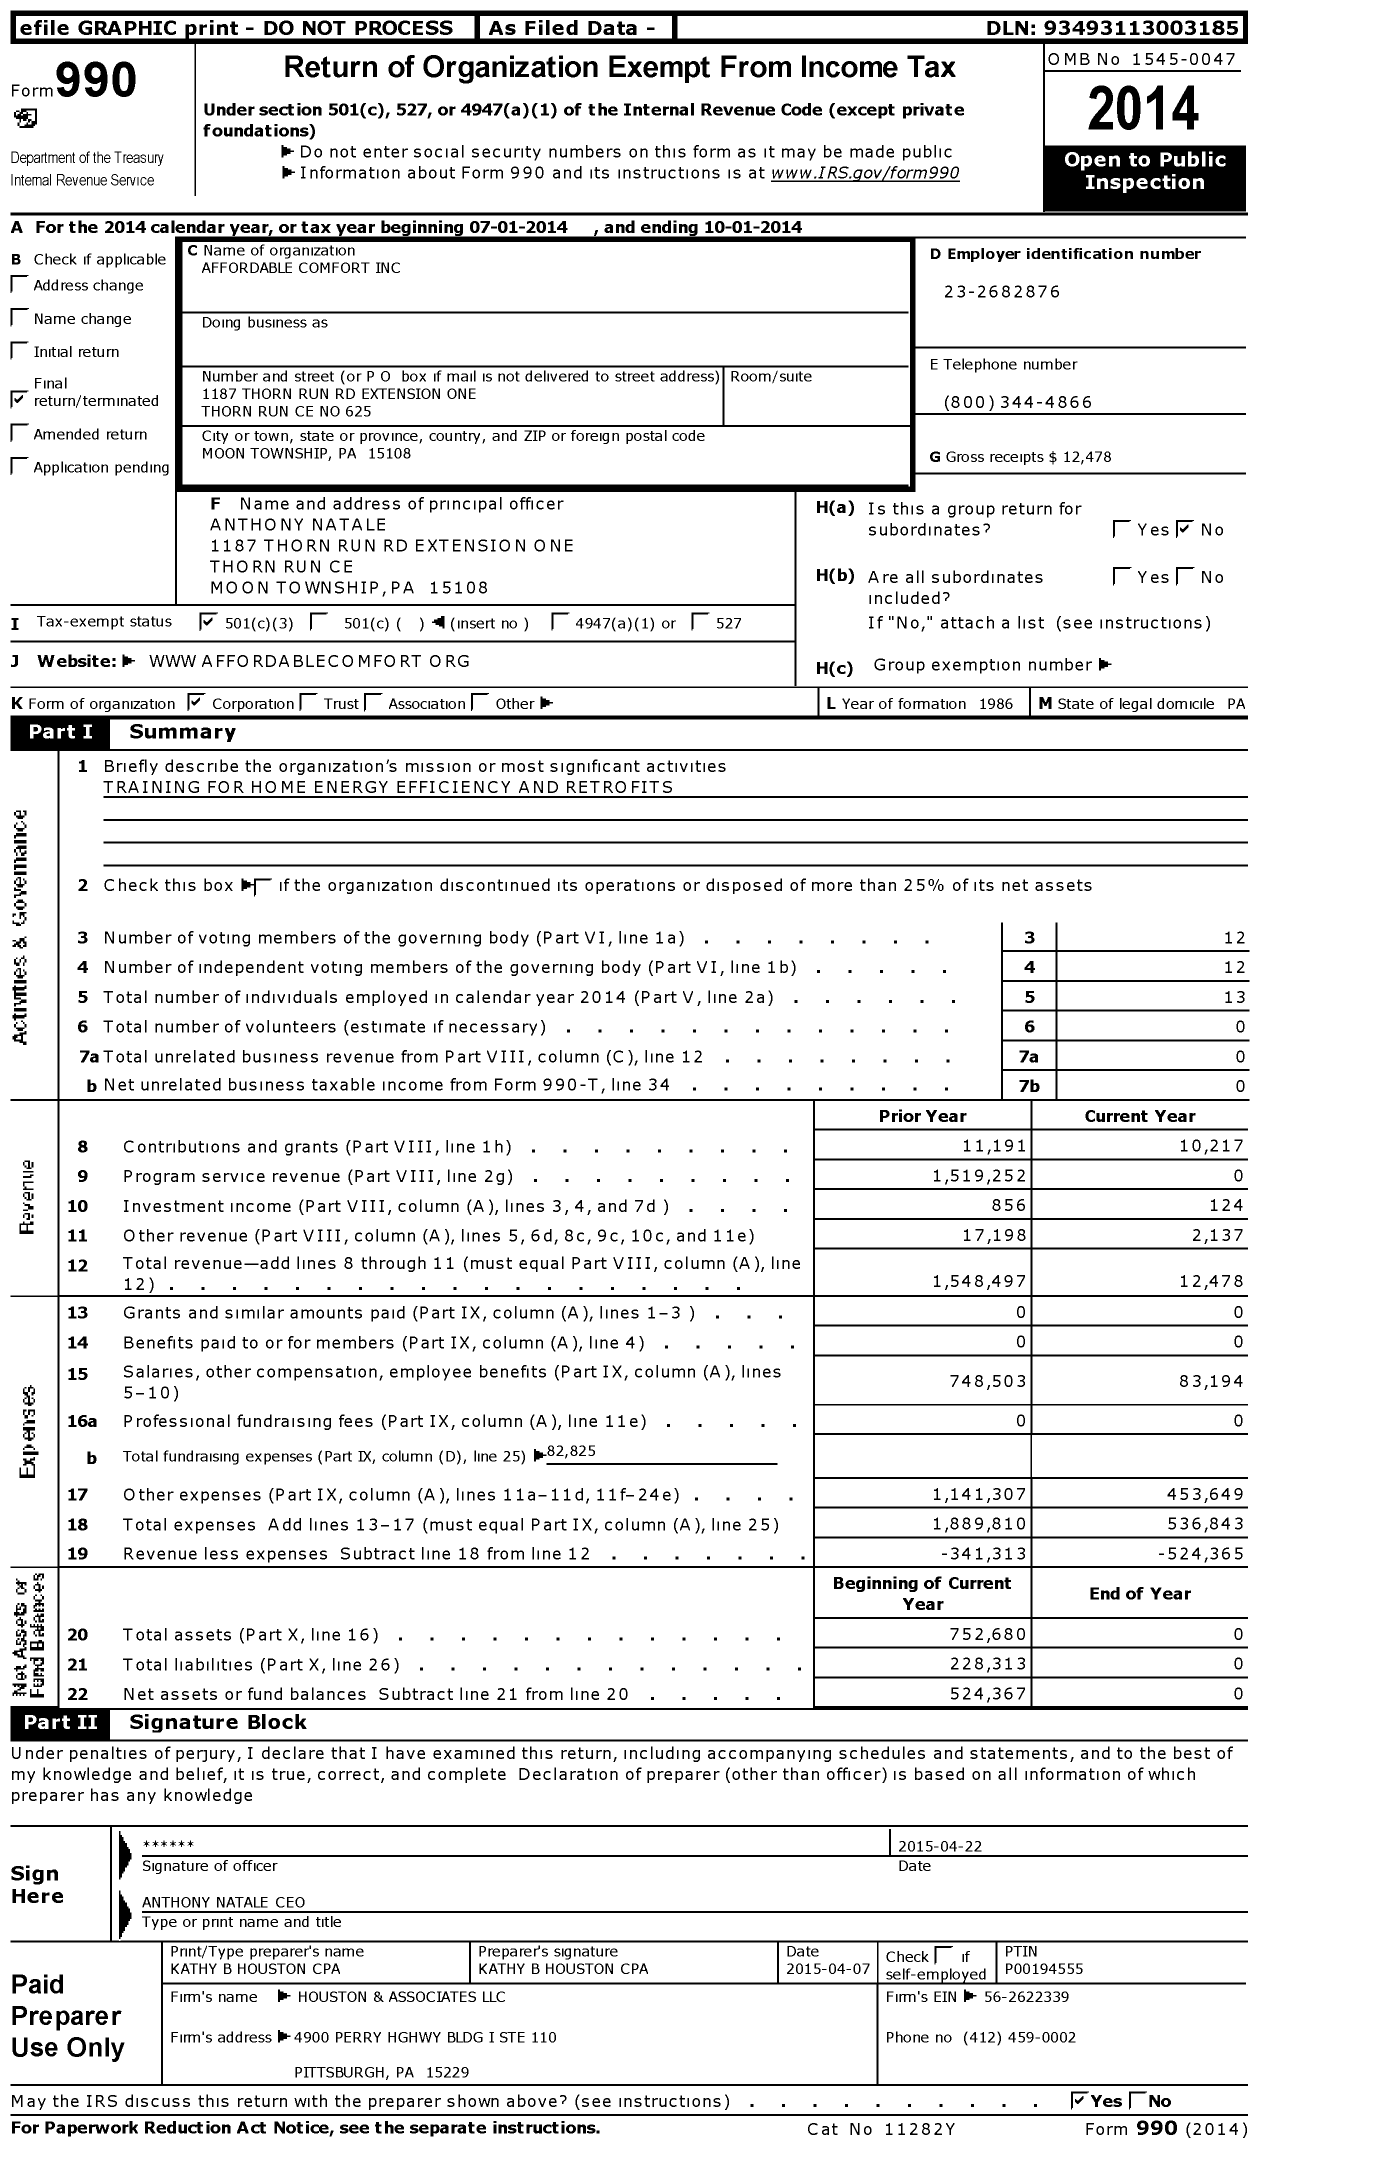 Image of first page of 2013 Form 990 for Affordable Comfort